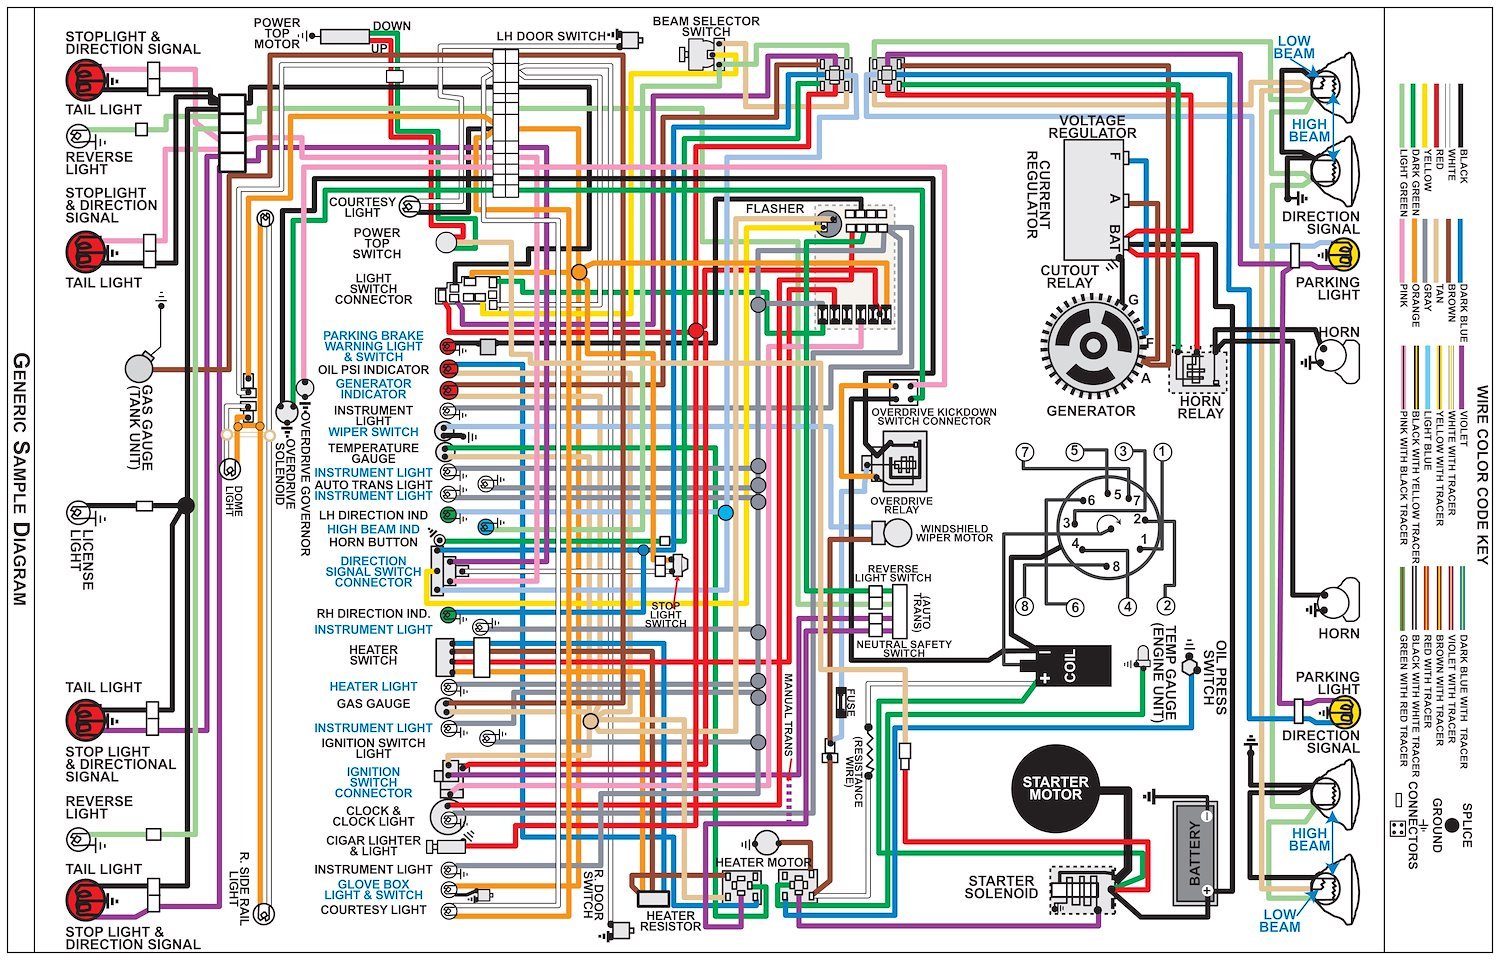 Wiring Diagram for 1970 Dodge Challenger with Rallye Dash (Non HEMI), 11 in x 17 in., Laminated